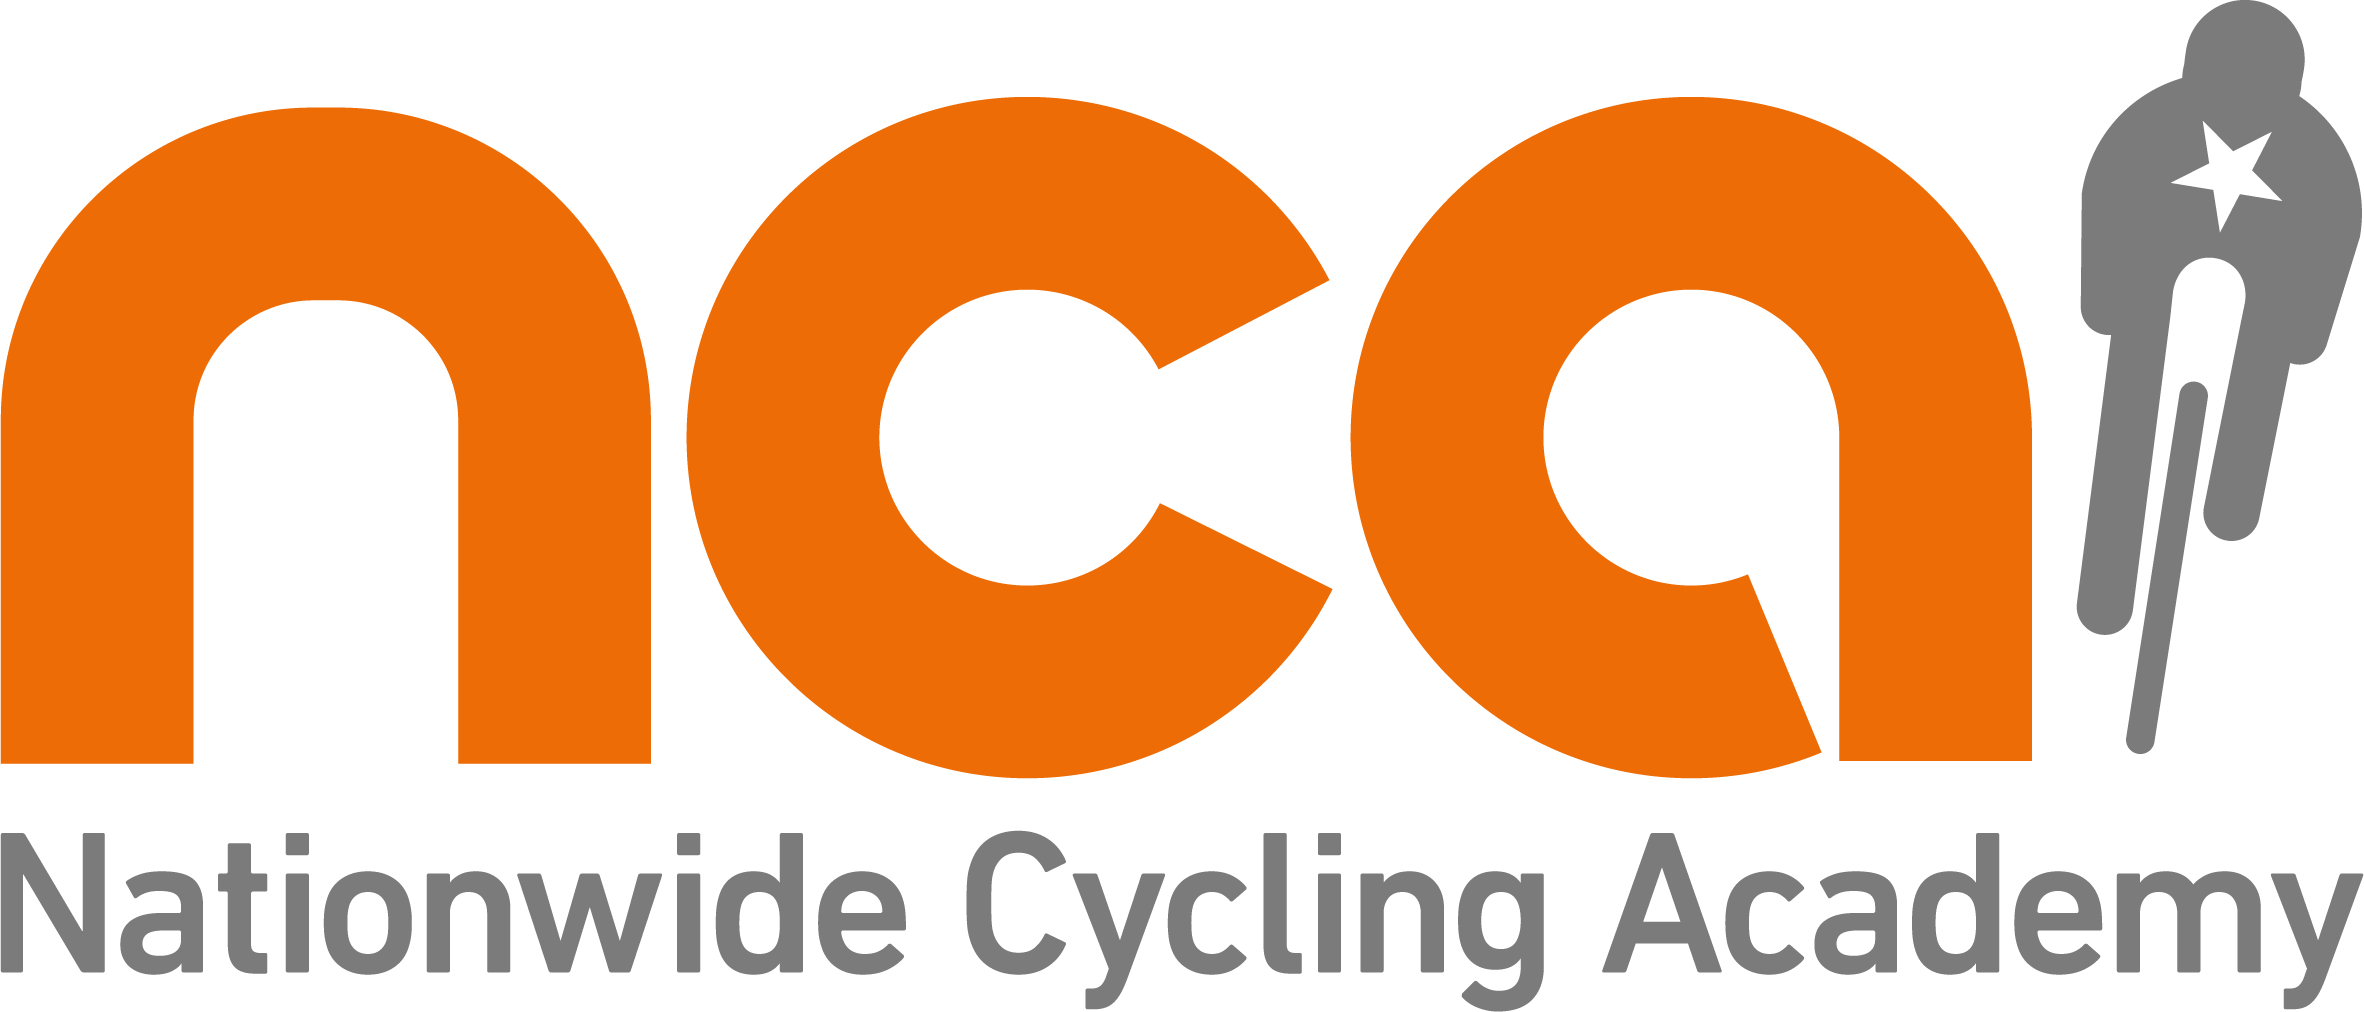 logo for Nationwide Cycling Academy